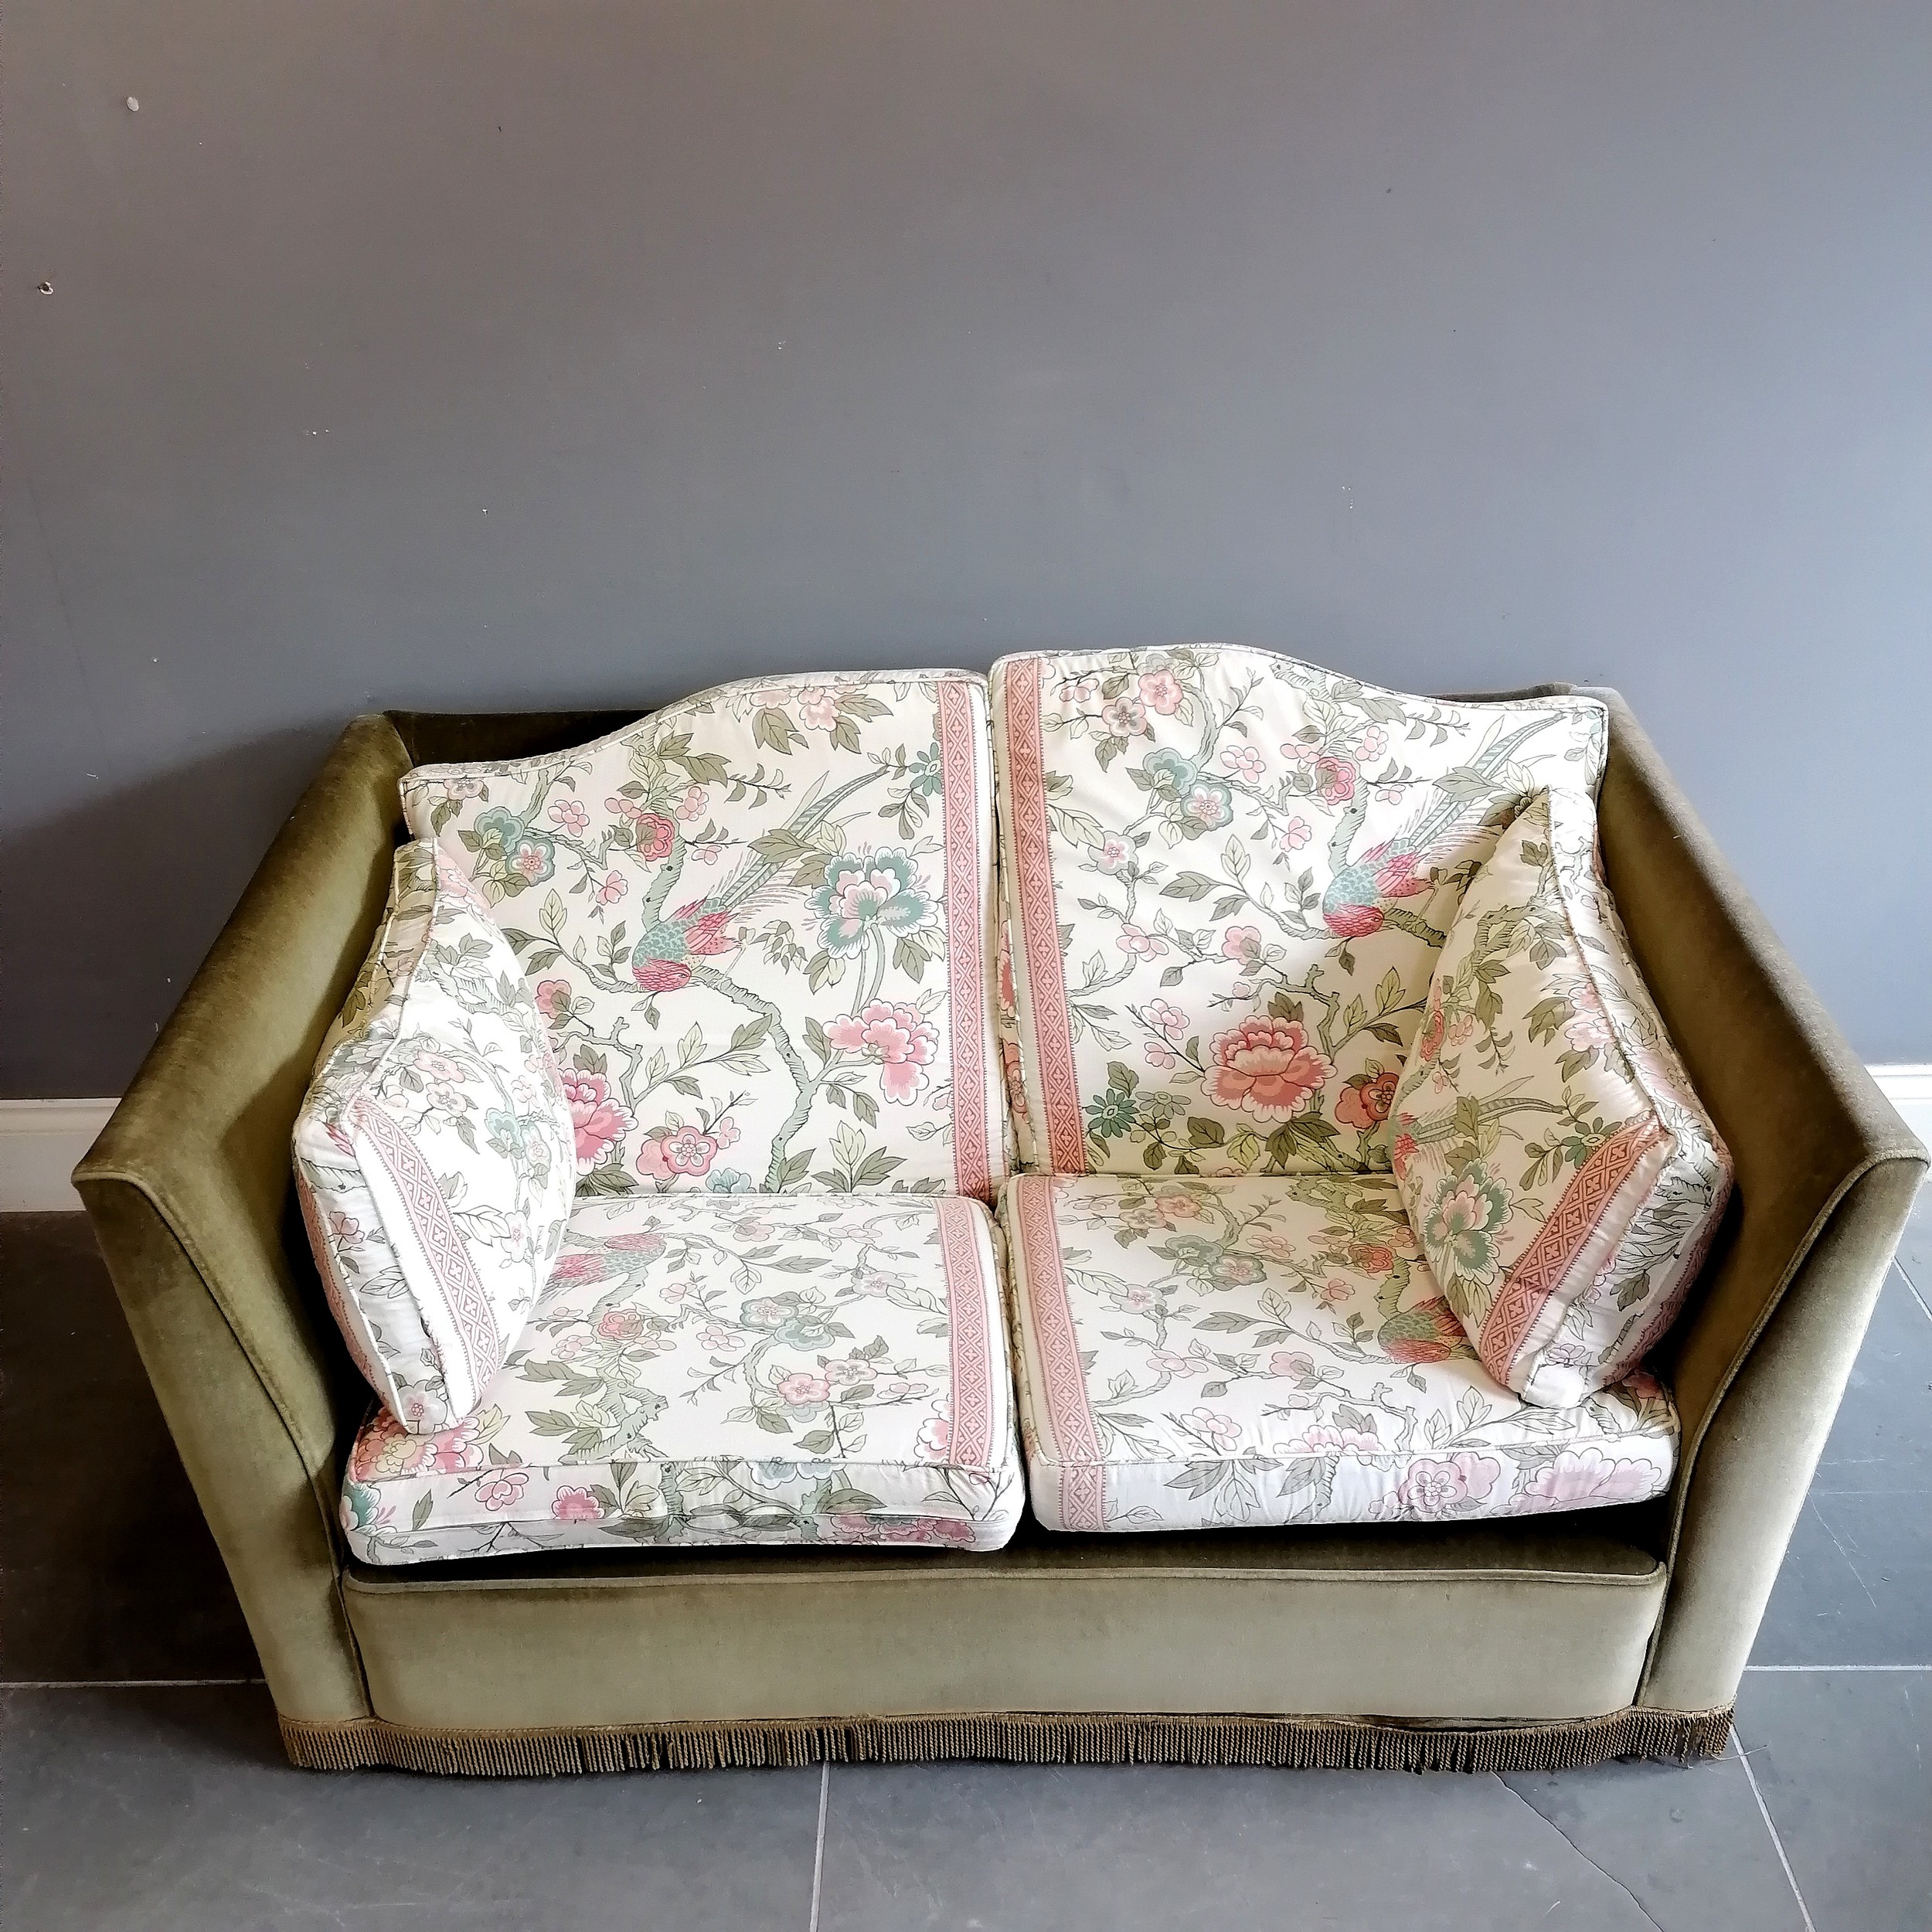 Knowle style 2 seater settee, upholstered in a green plush with Jane Churchill floral and exotic